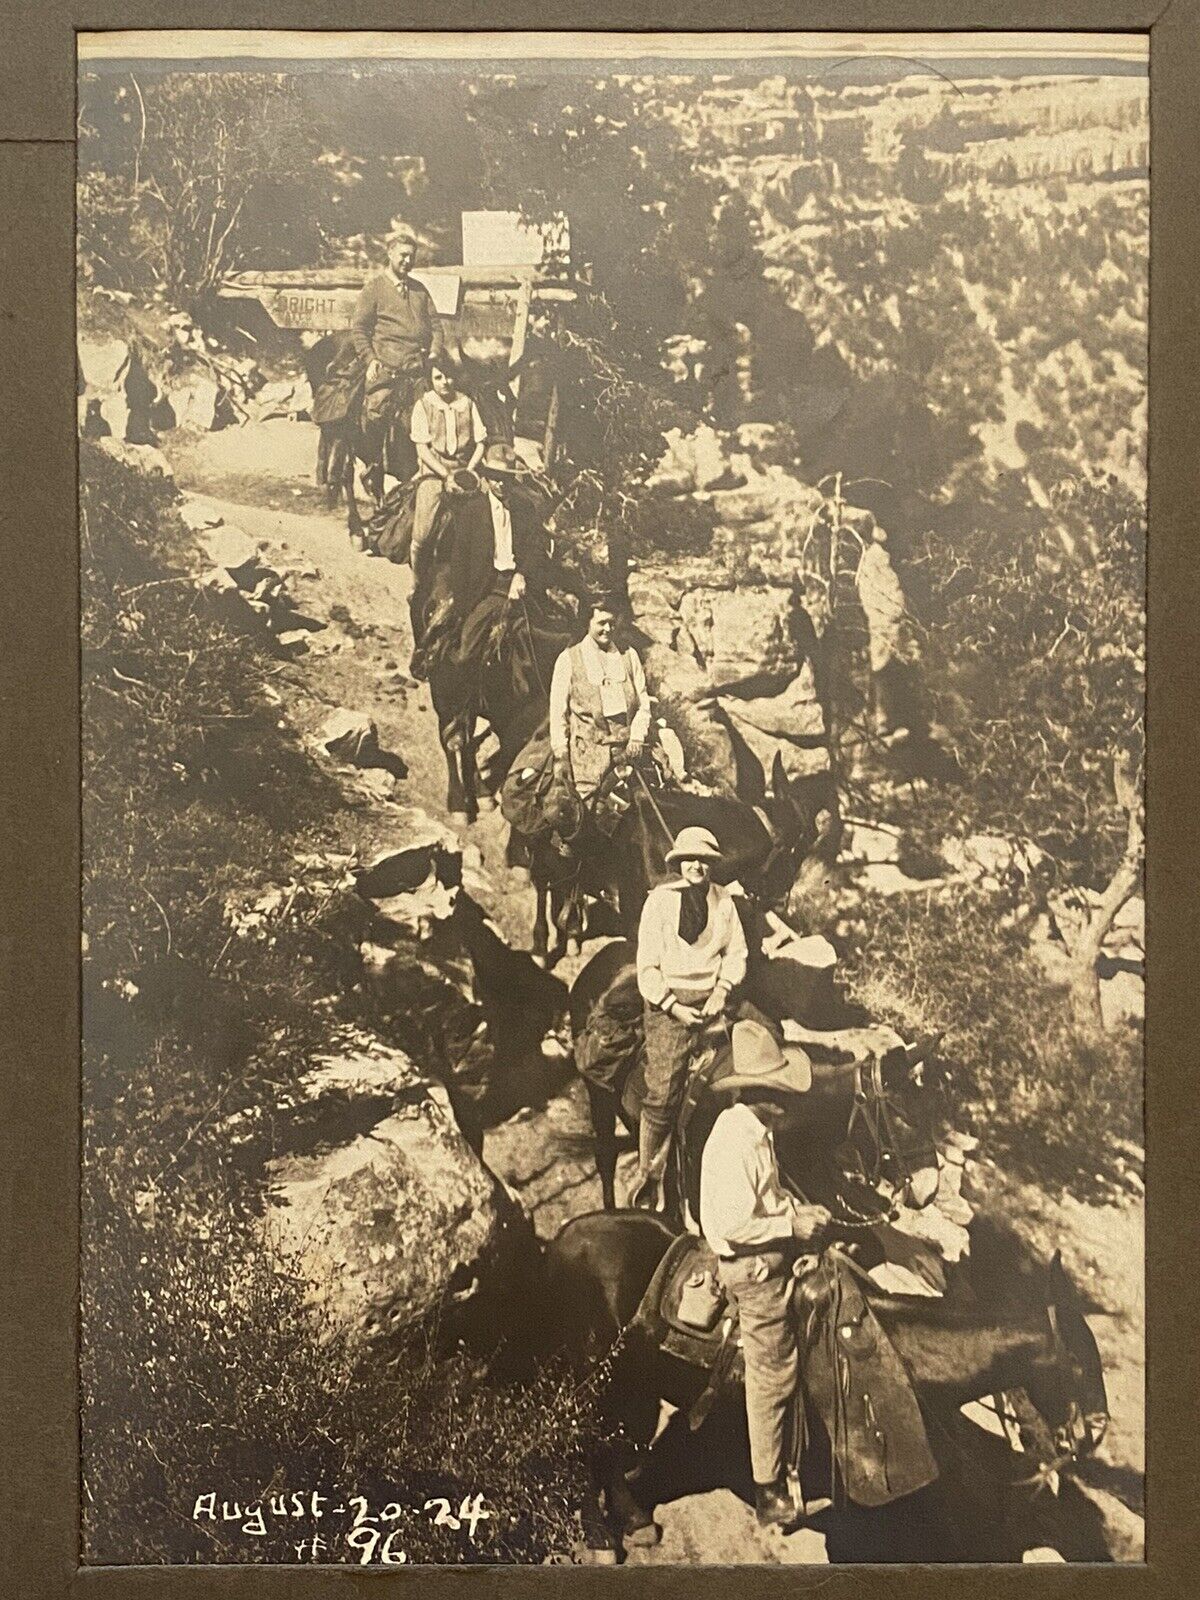 1924 Kolb Brothers Photo Bright Angel Trail Grand Canyon Sightseers Riding Mules